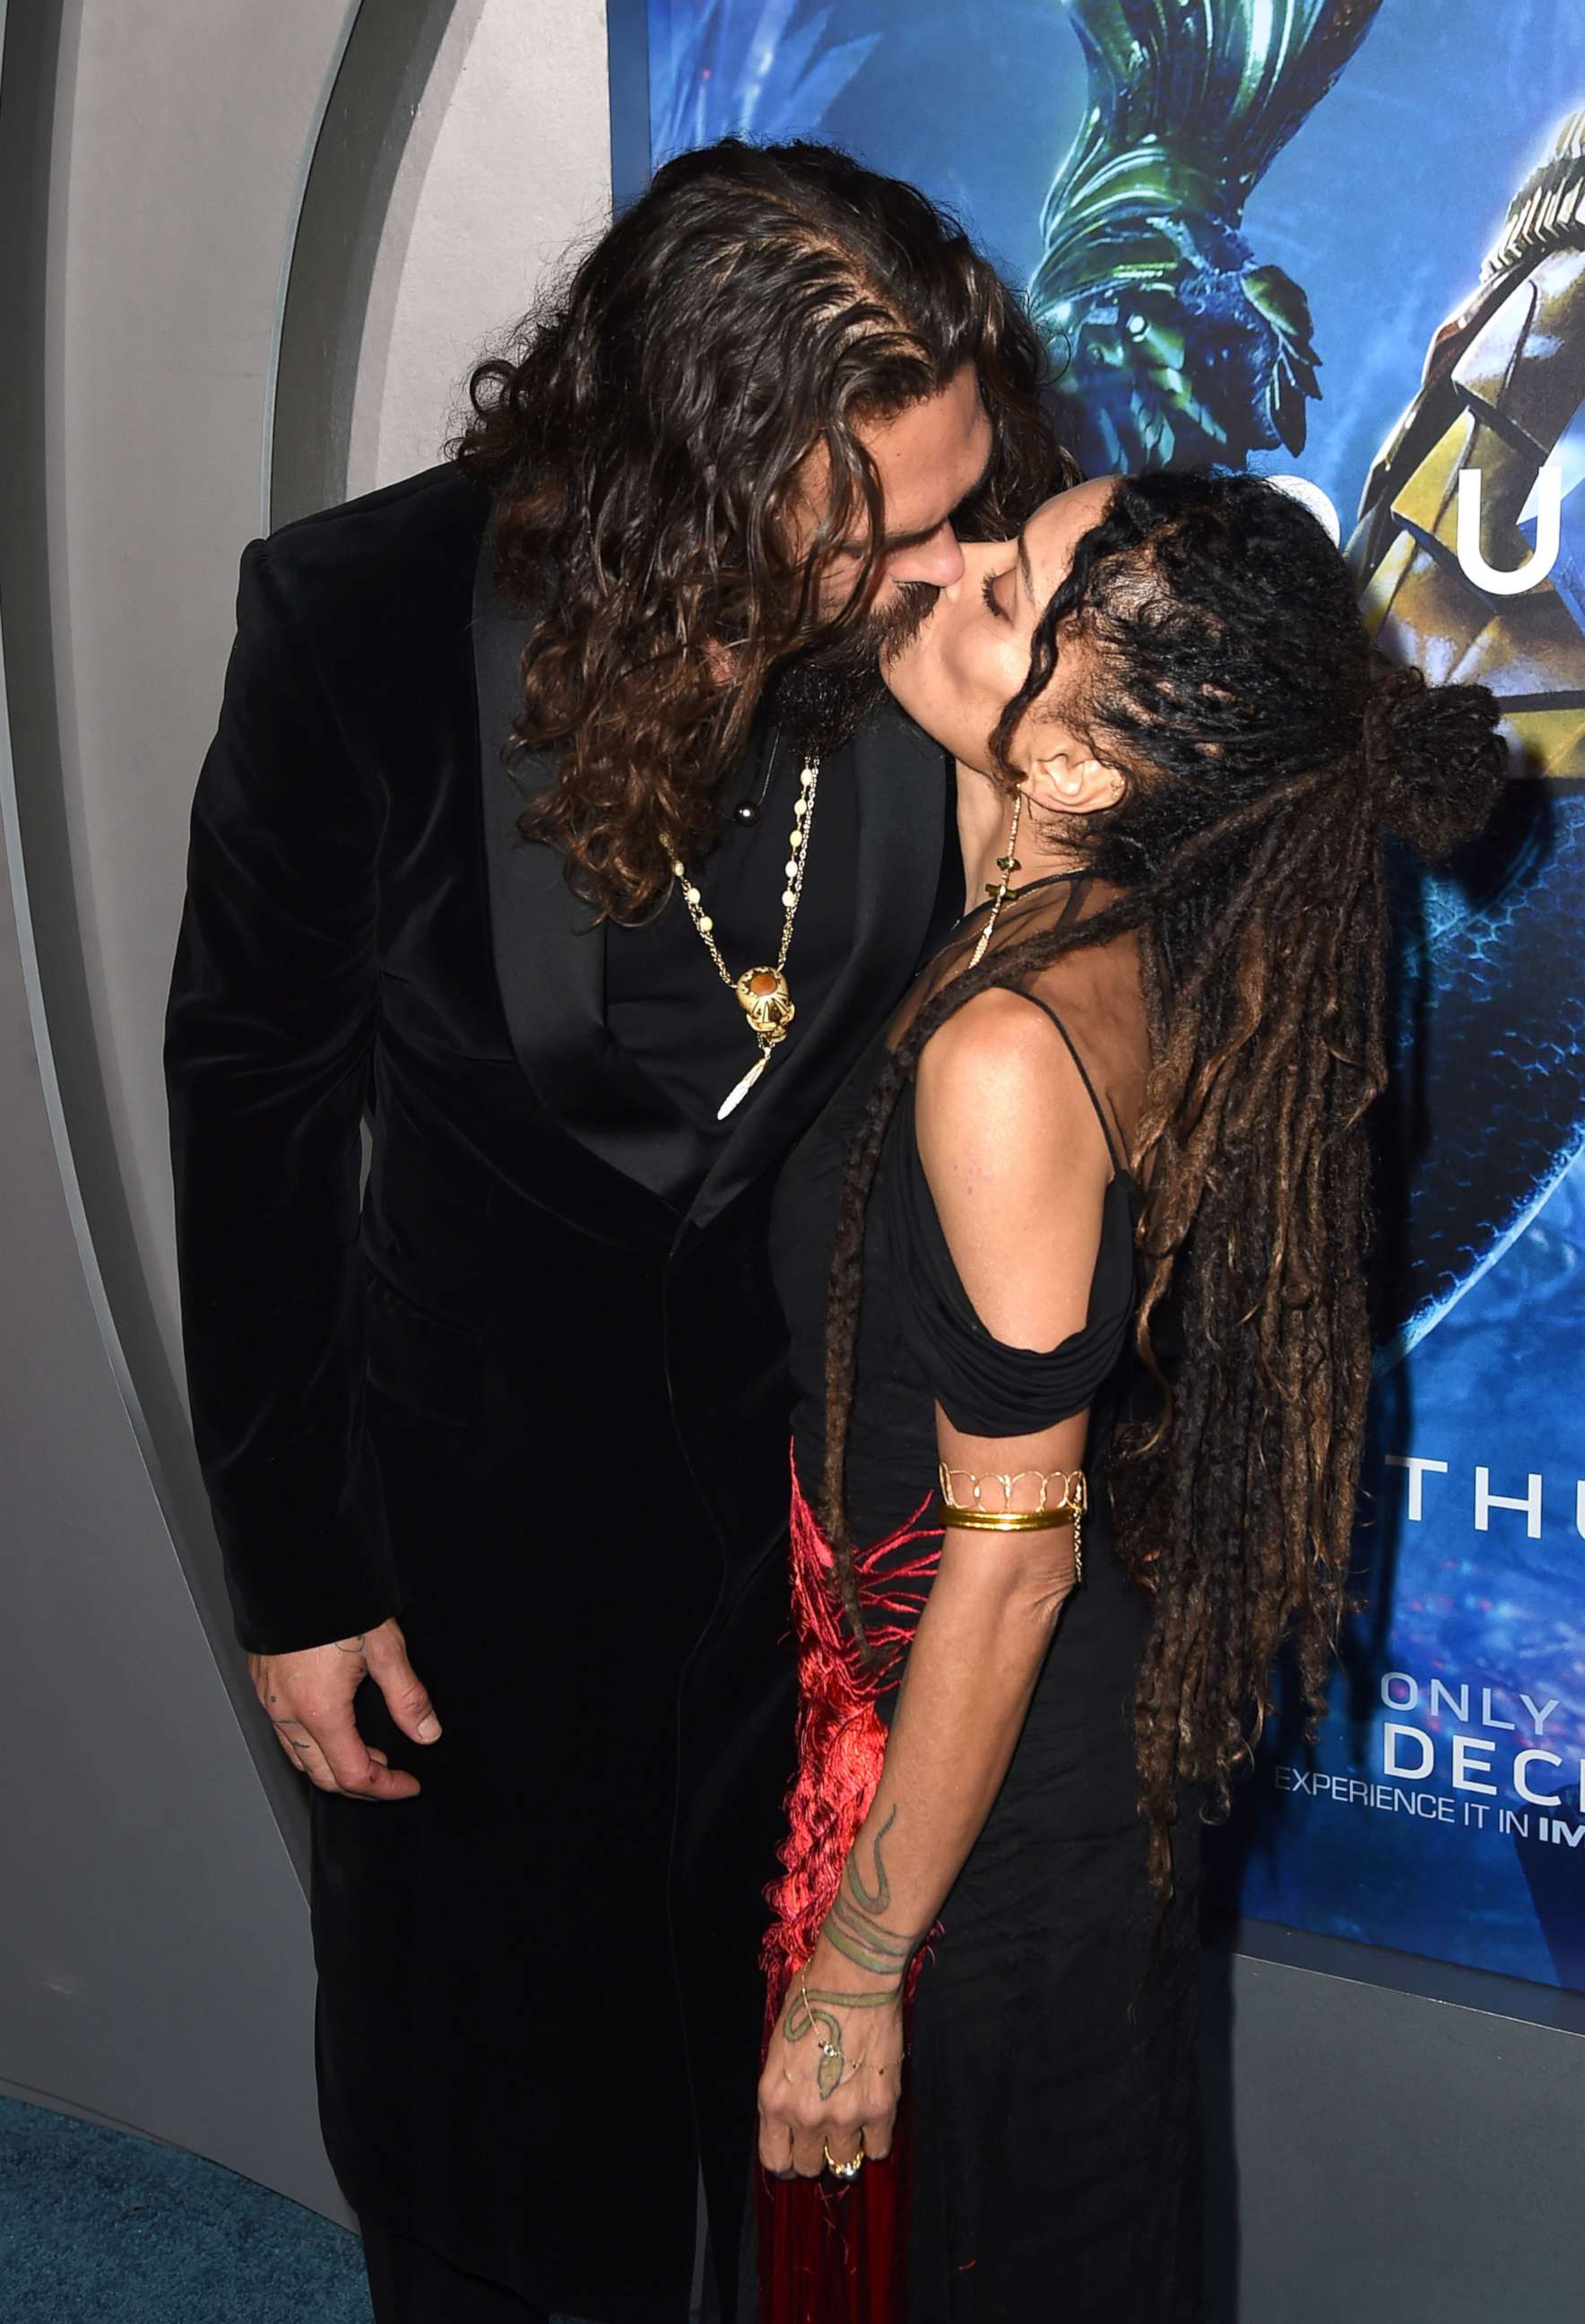 PHOTO: Jason Momoa and his wife Lisa Bonet arrive at the premiere of Warner Bros. Pictures' "Aquaman" at the Chinese Theatre, Dec. 12, 2018 in Los Angeles.